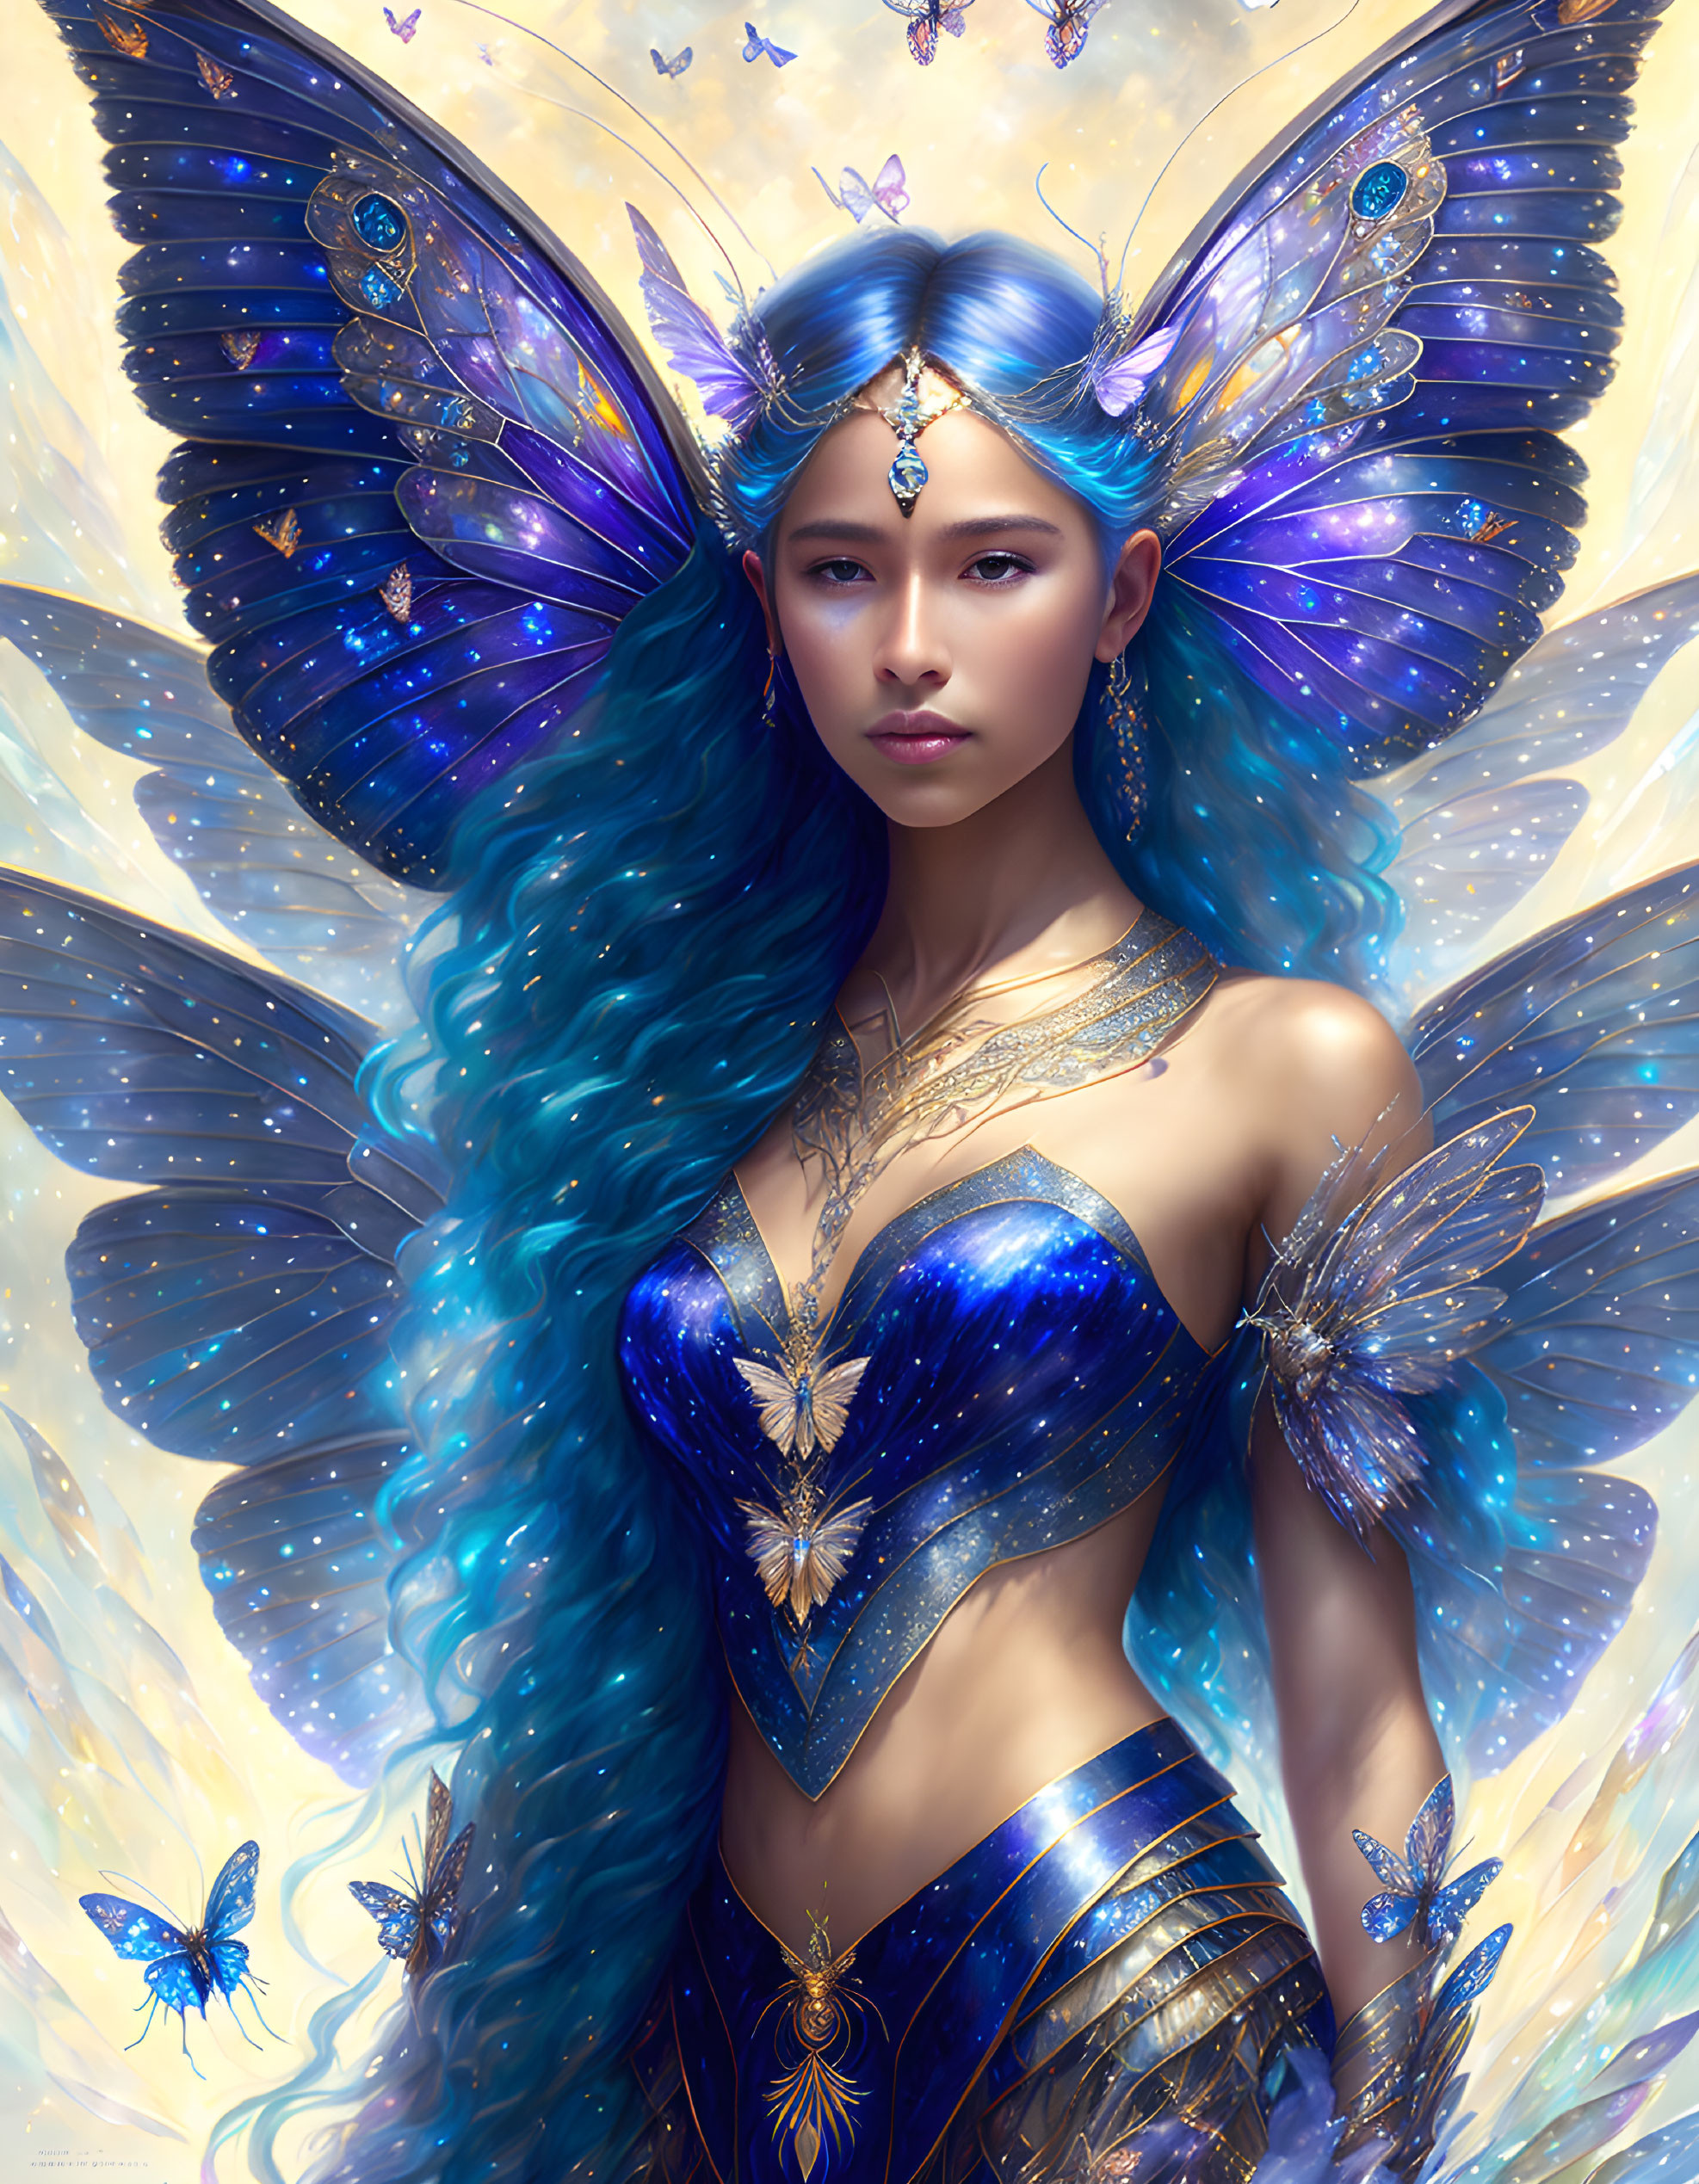 Fantasy illustration of woman with blue hair and butterfly wings, gold jewelry, surrounded by small butterflies.